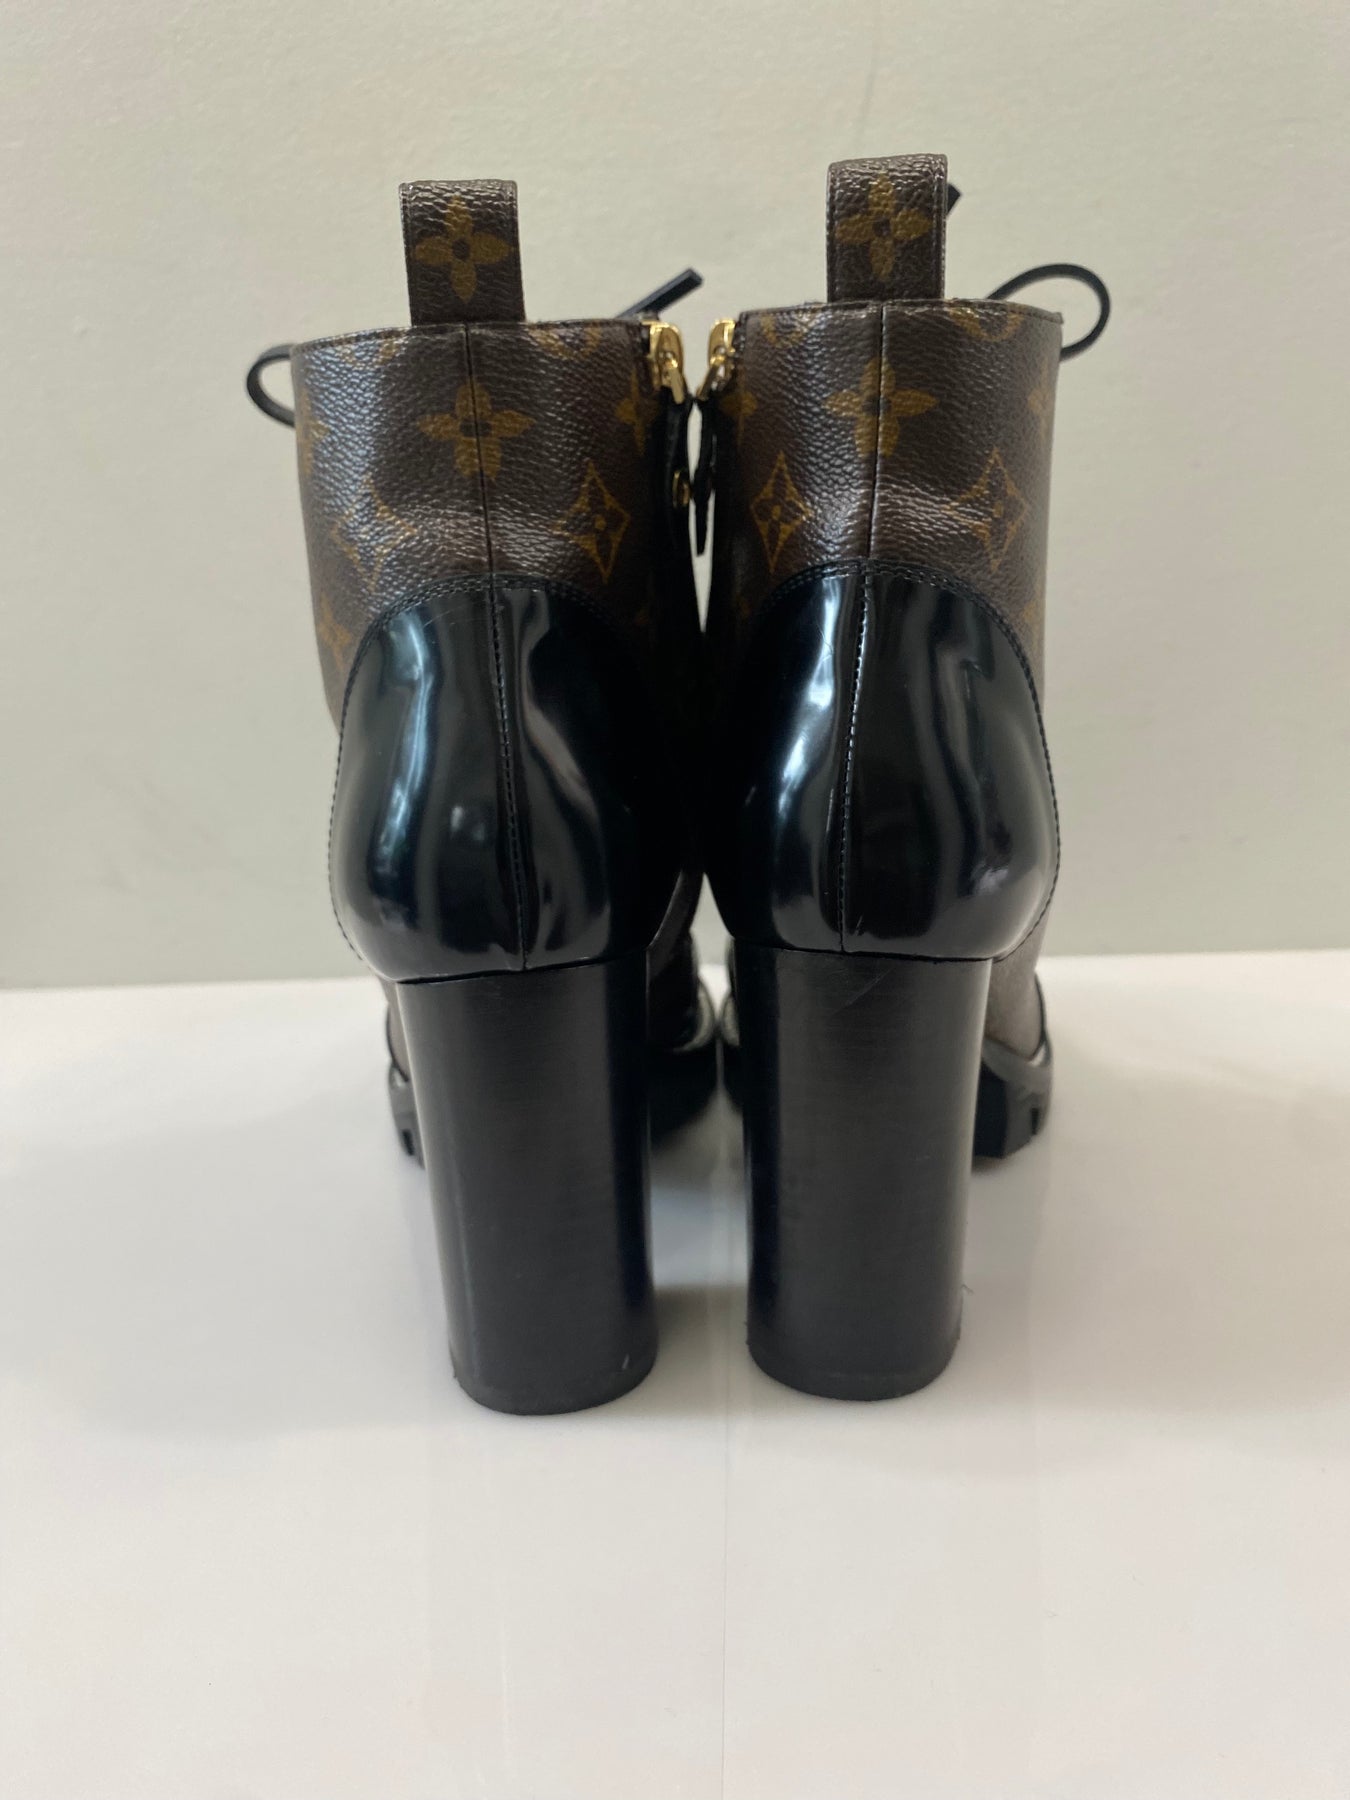 Louis Vuitton - Authenticated Star Trail Ankle Boots - Leather Brown for Women, Very Good Condition